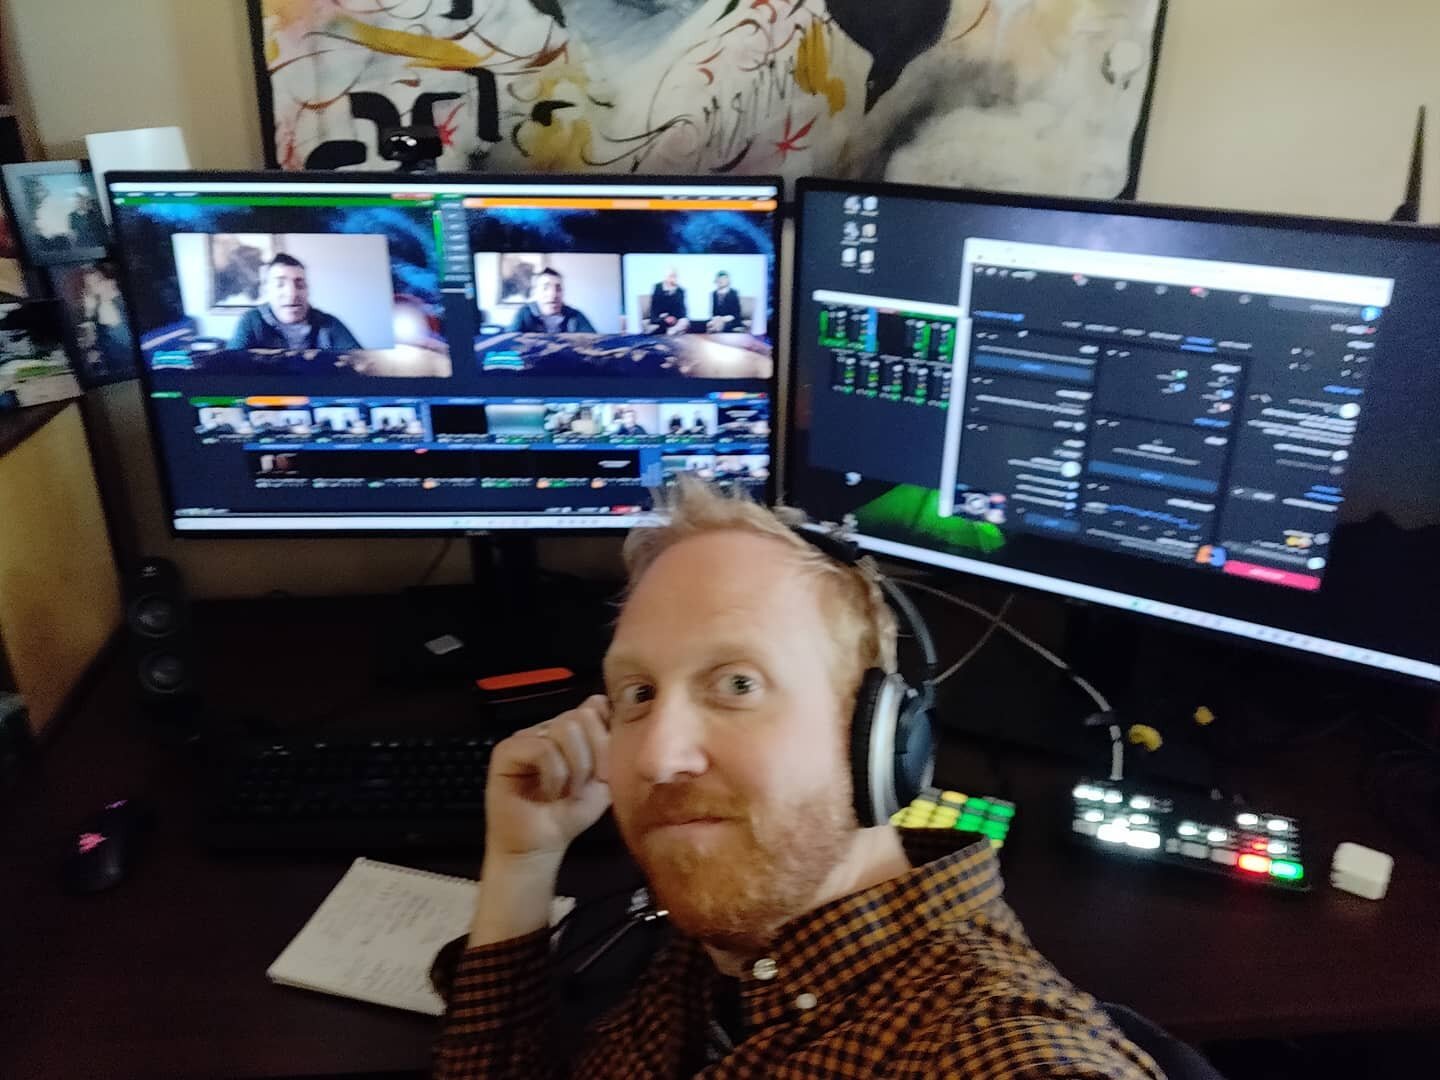 Just keep going, each show we improve our production and interview style. It's the same show, with the same setup, but were always trying new things. This is marketing tip tea time at 2:22 with @zovamarketing #livestreaming #vmix #DTGPlacetobe #downt